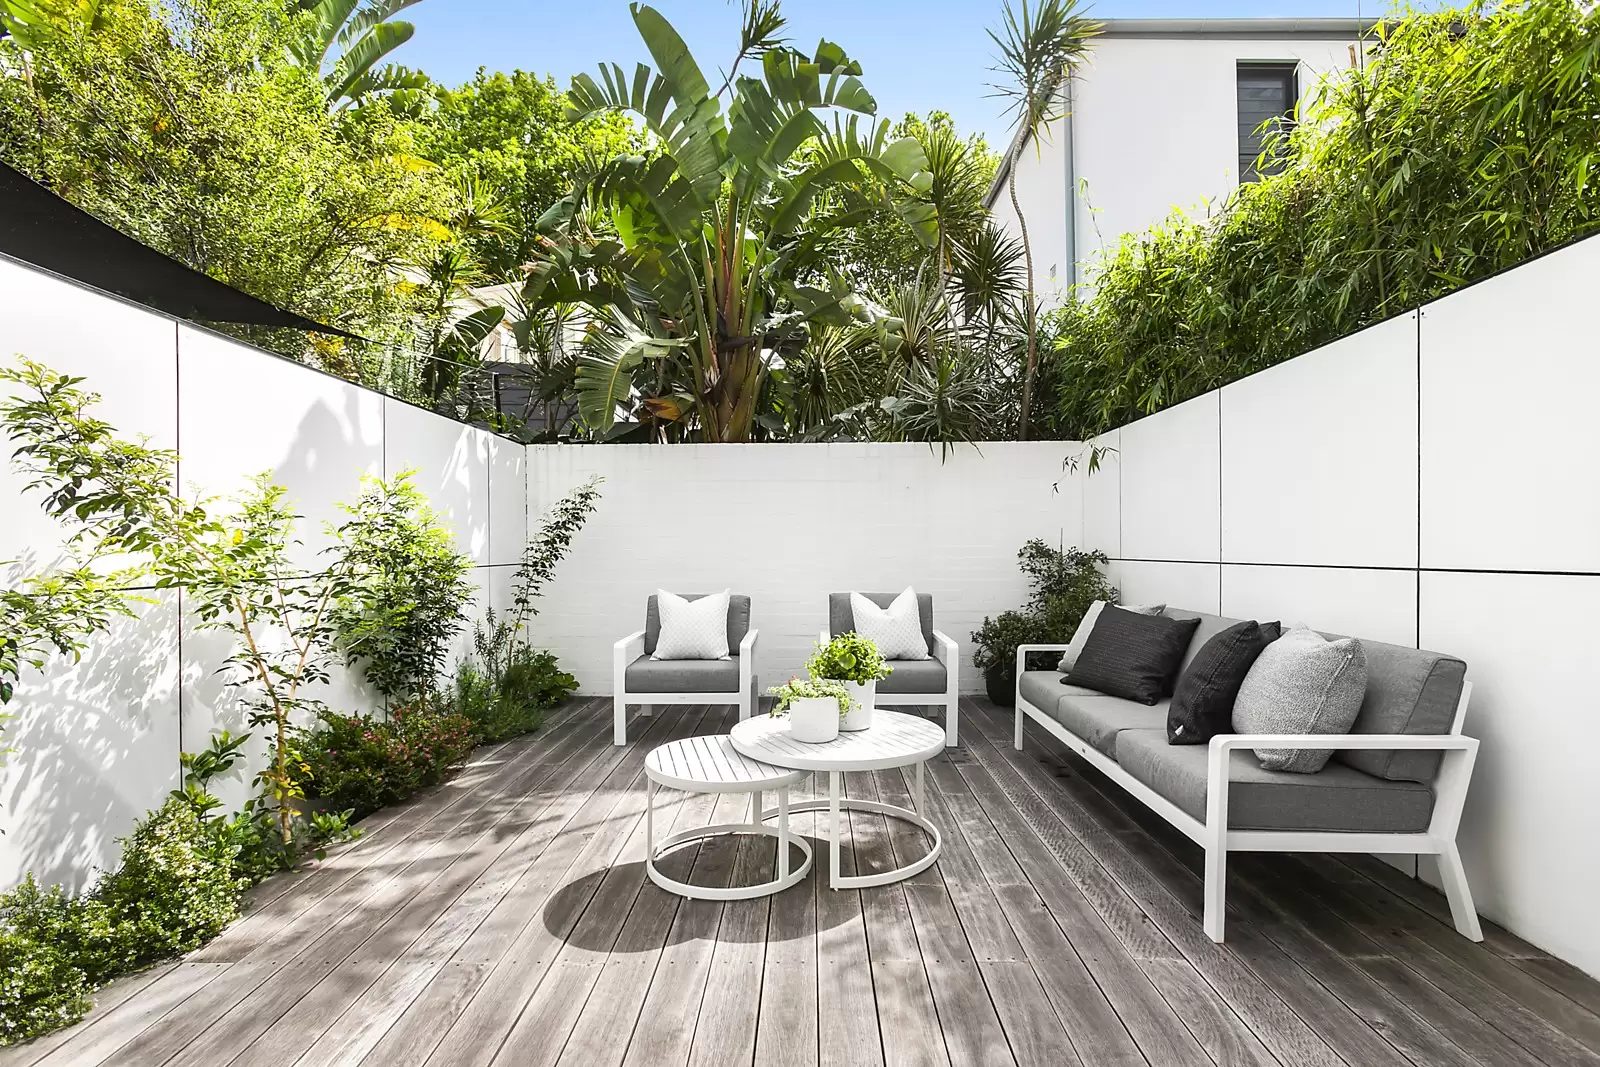 Photo #4: 20 Spicer Street, Woollahra - Sold by Sydney Sotheby's International Realty